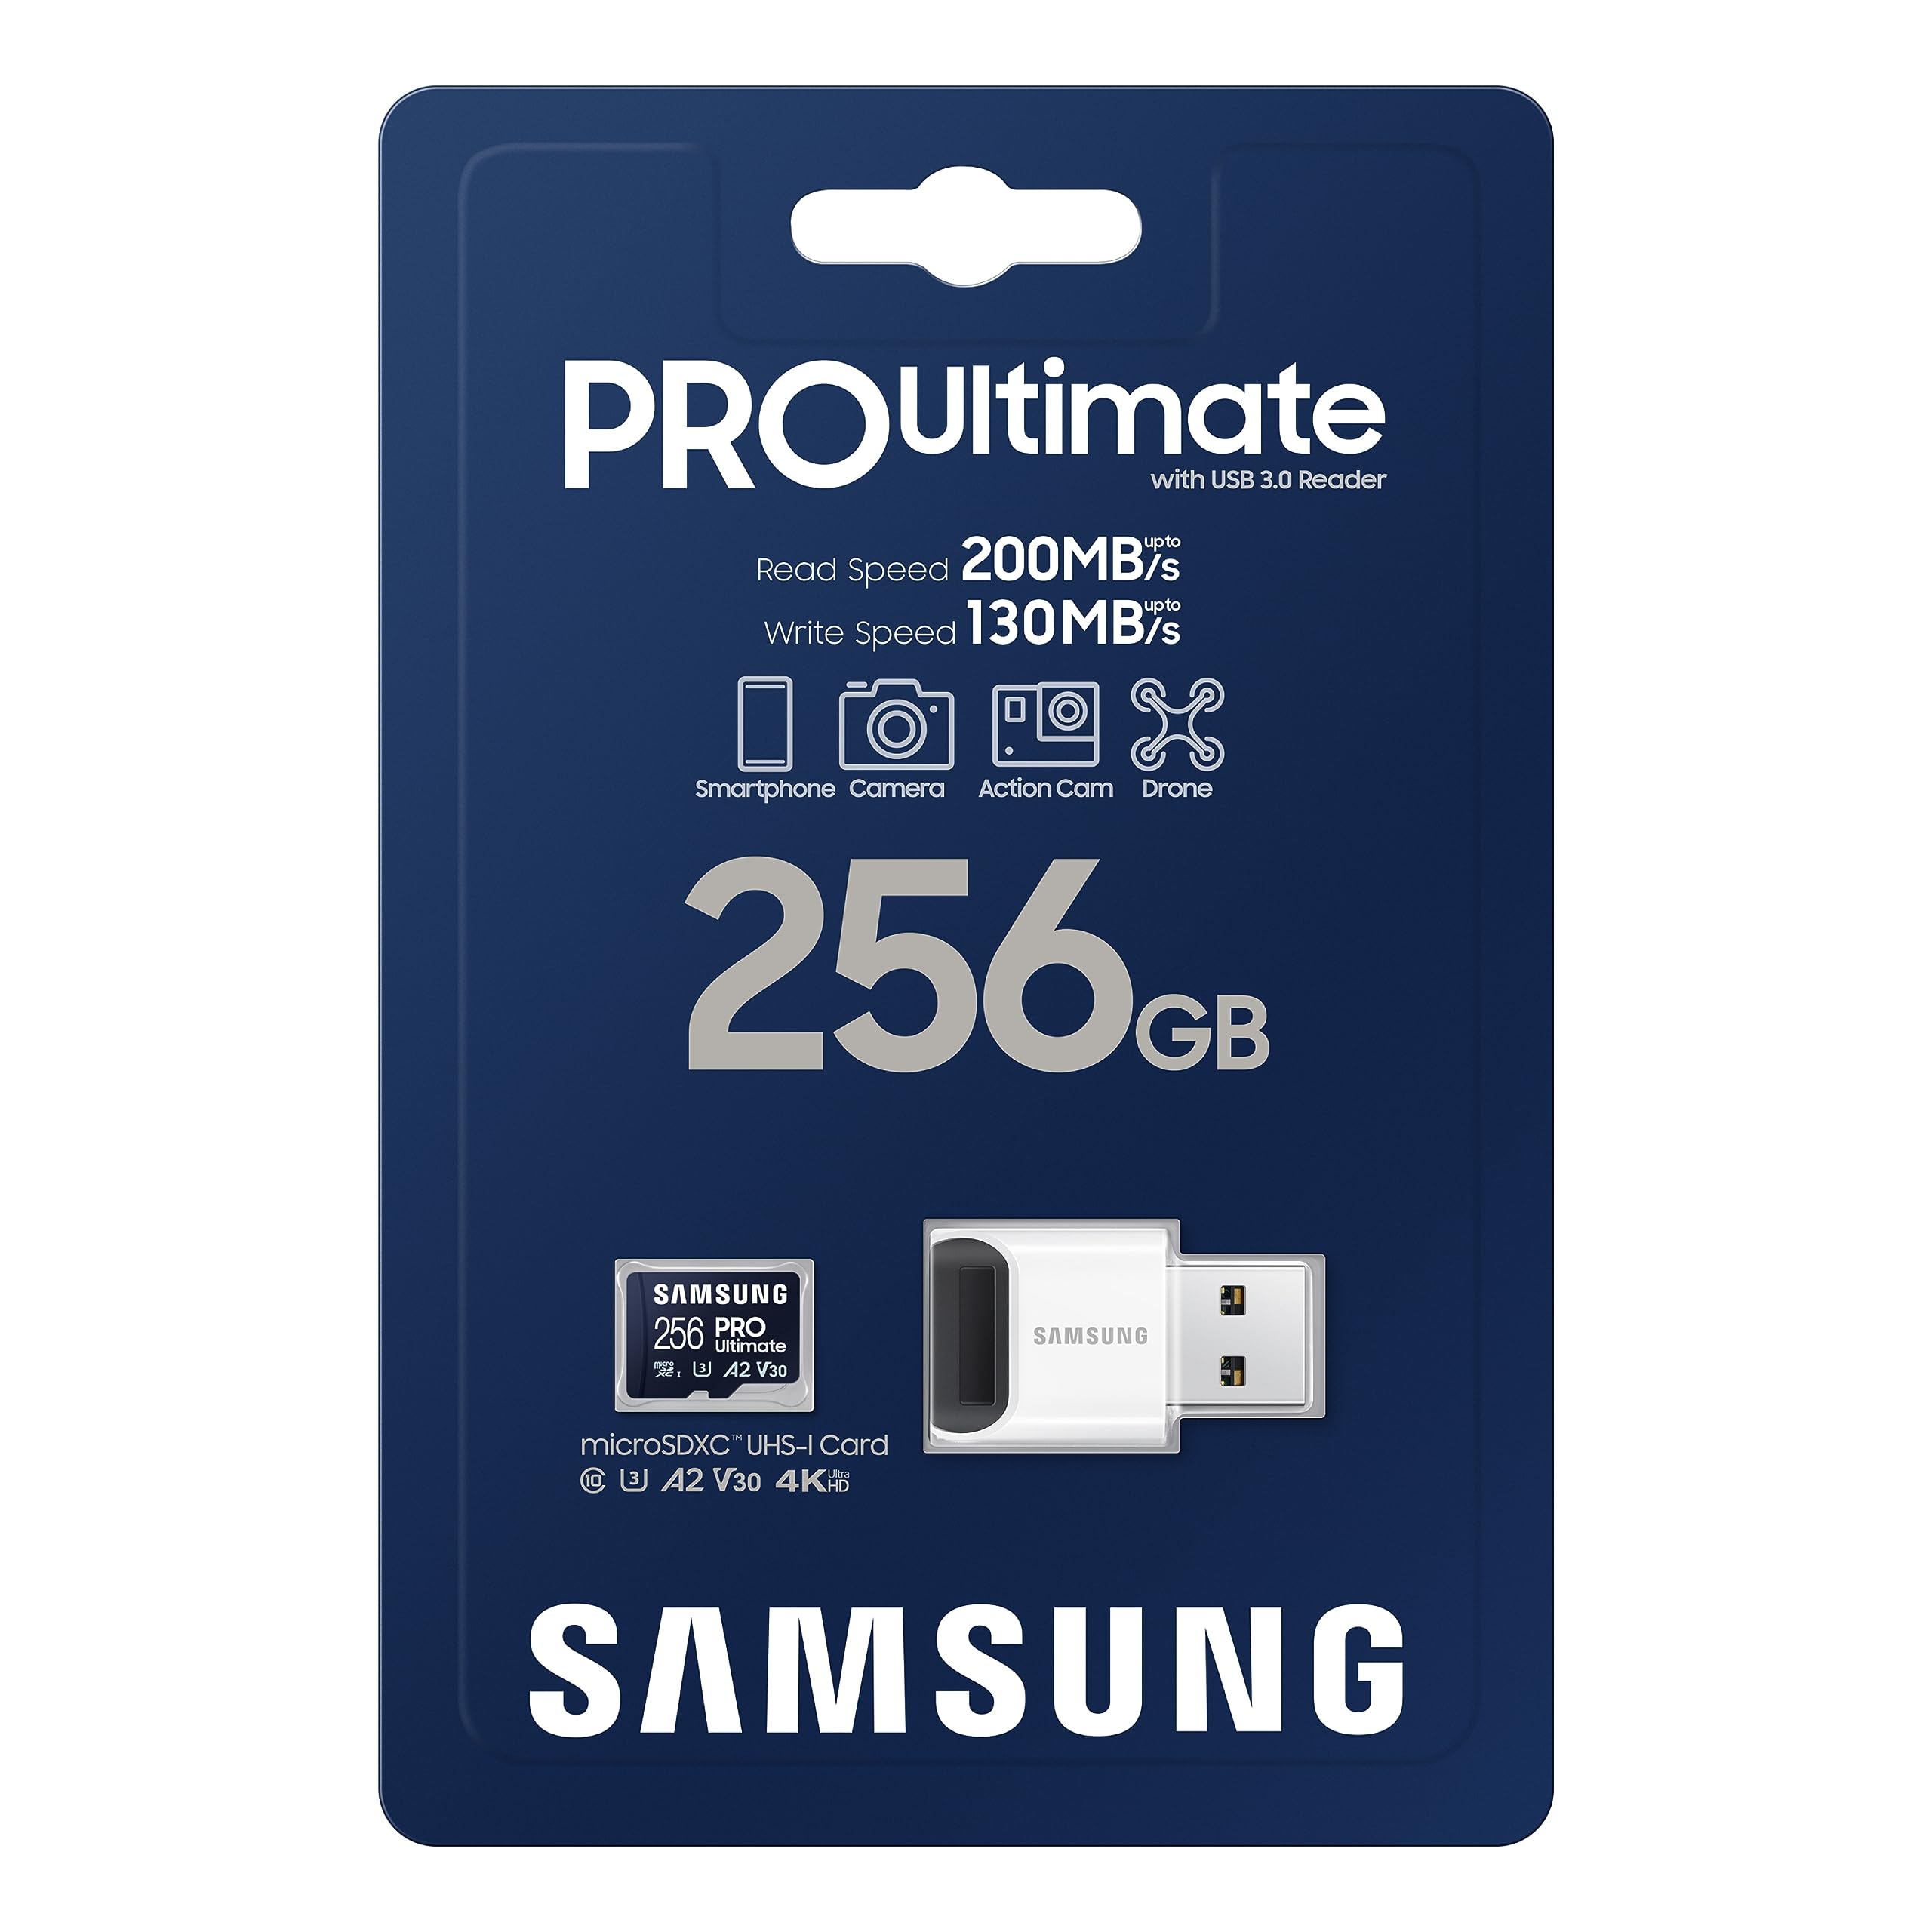 SAMSUNG PRO Ultimate microSD Memory Card + Adapter, 256GB microSDXC, Up to 200 MB/s, 4K UHD, UHS-I, Class 10, U3,V30, A2 for GoPRO Action Cam, DJI Drone, Gaming, Phones, Tablets, MB-MY256SA/AM